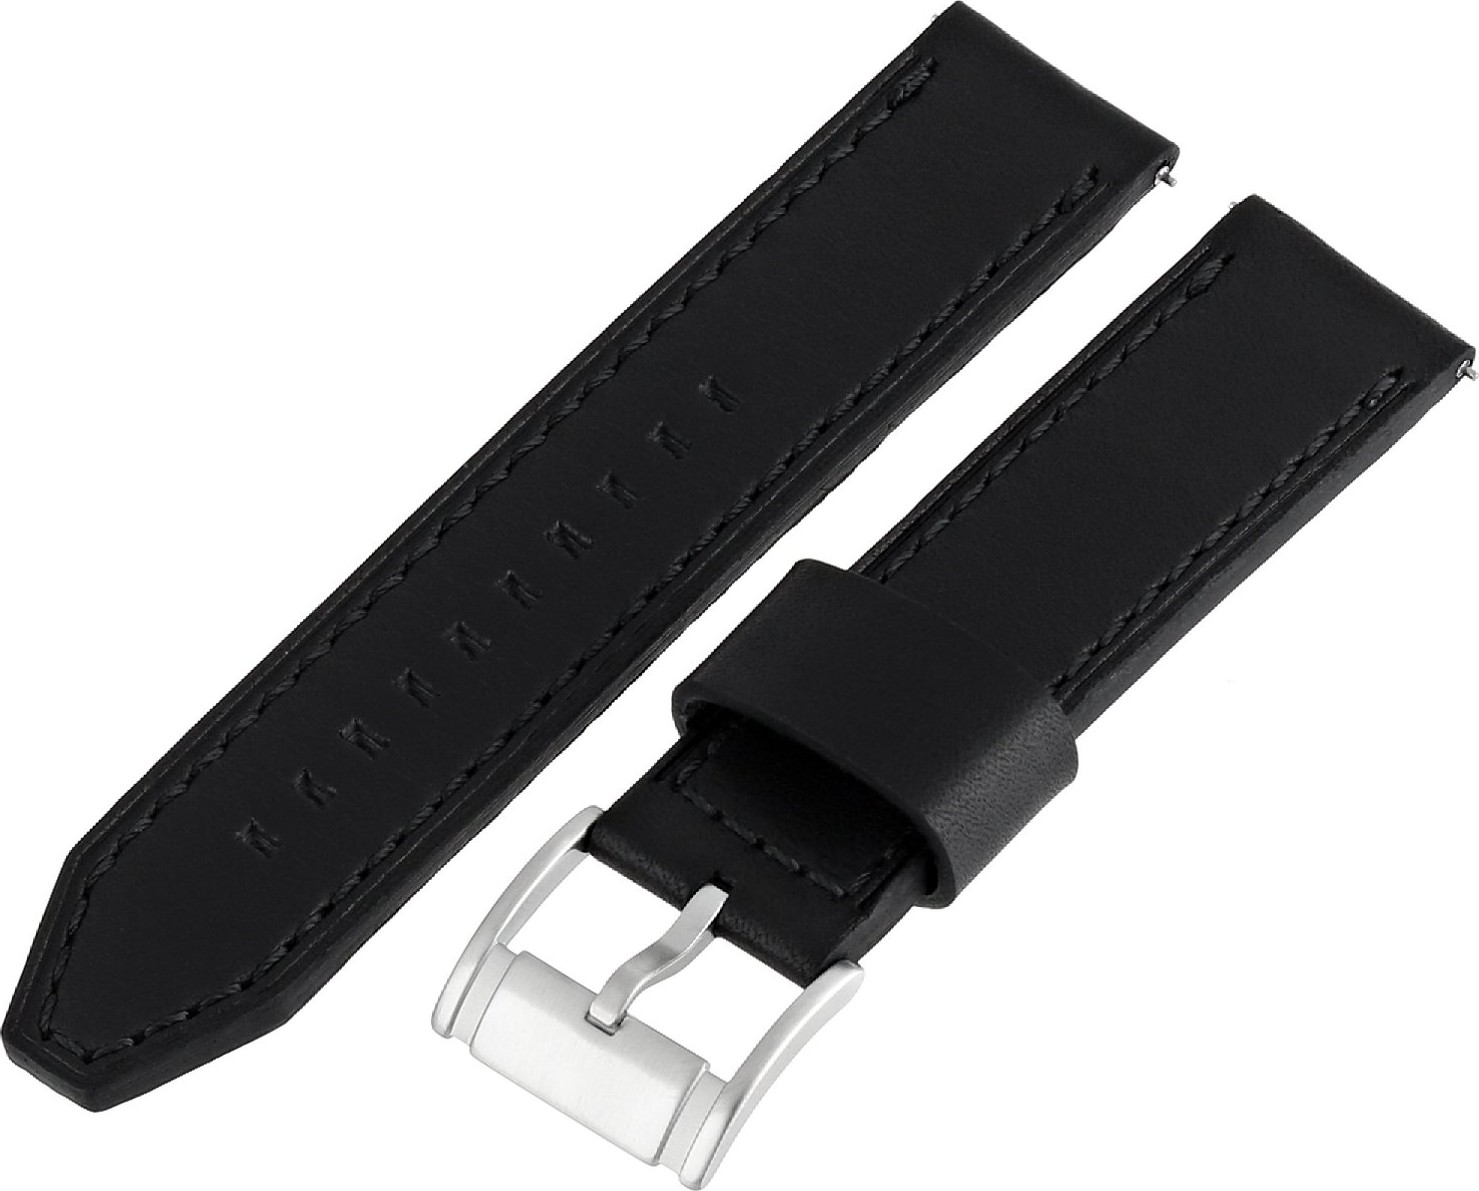 Fossil S221001 Men's Leather Watch Strap - Black 22mm